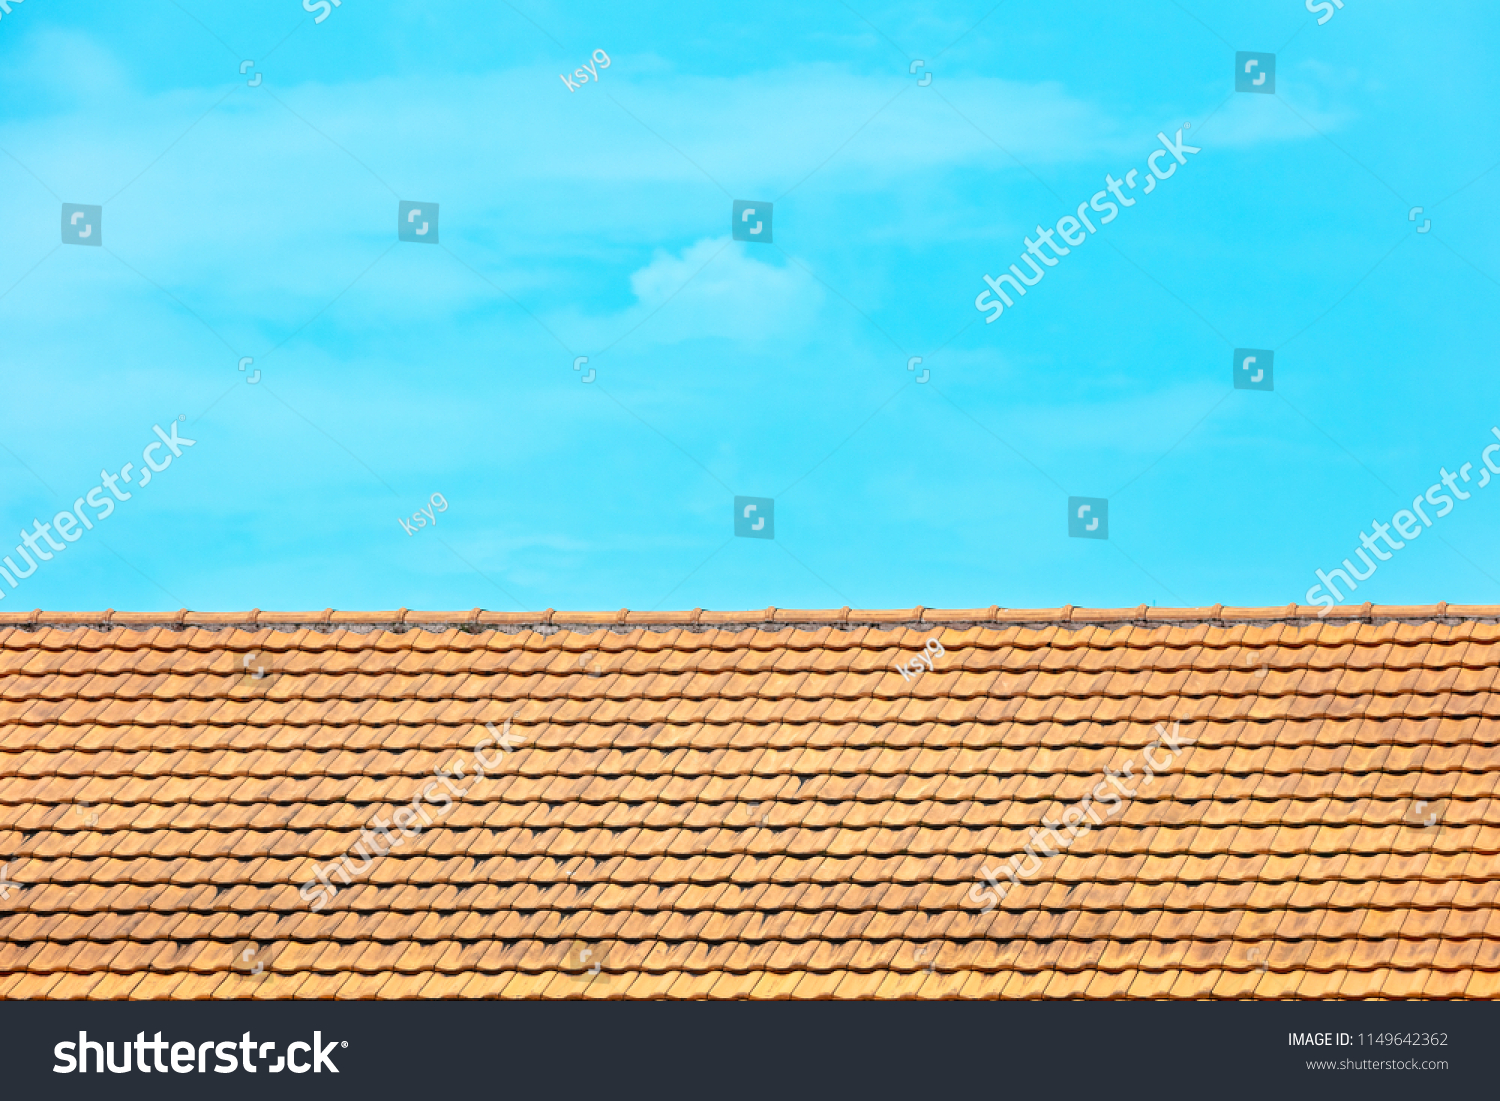 pitched roof tiles in repetitive patterns, old architecture shophouses Singapore Asia #1149642362